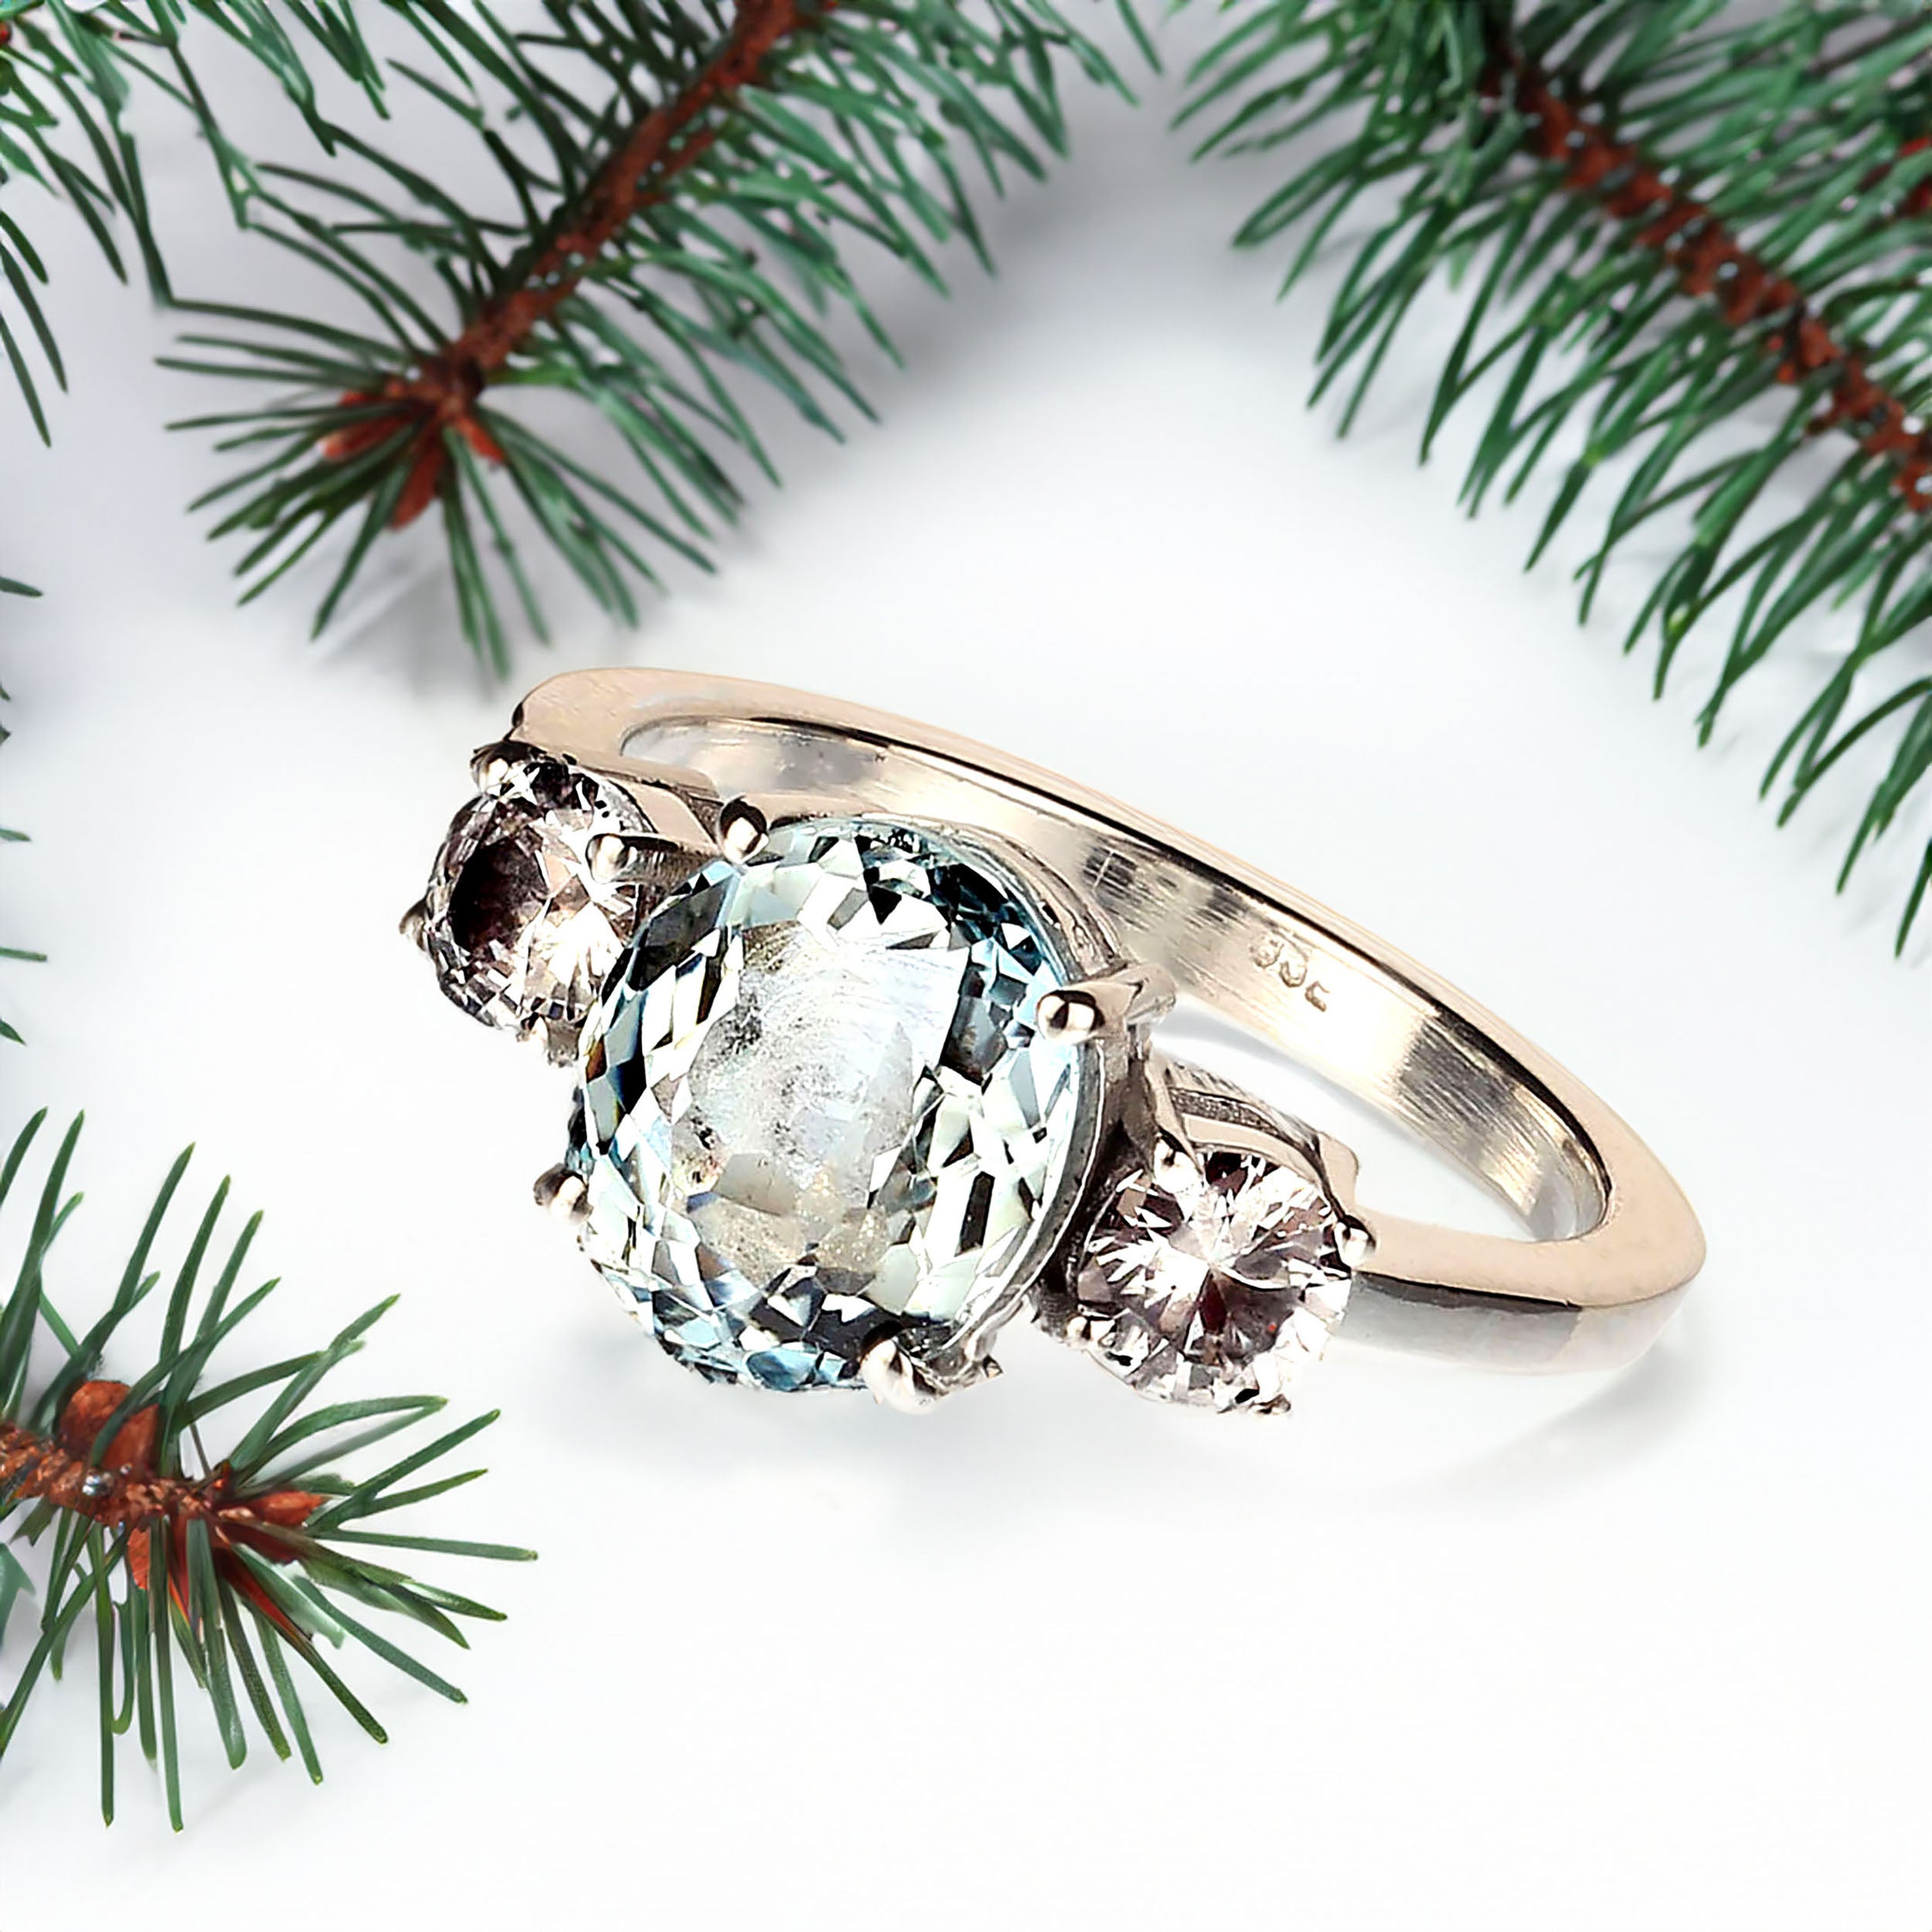 2.8Ct oval light Aquamarine and white Sapphire ring. These lovely gemstones are set in Sterling Silver.  The two round Sapphires total 1.14cts and are perfect accents to the oval Aquamarine which comes straight from one of our favorite vendors in